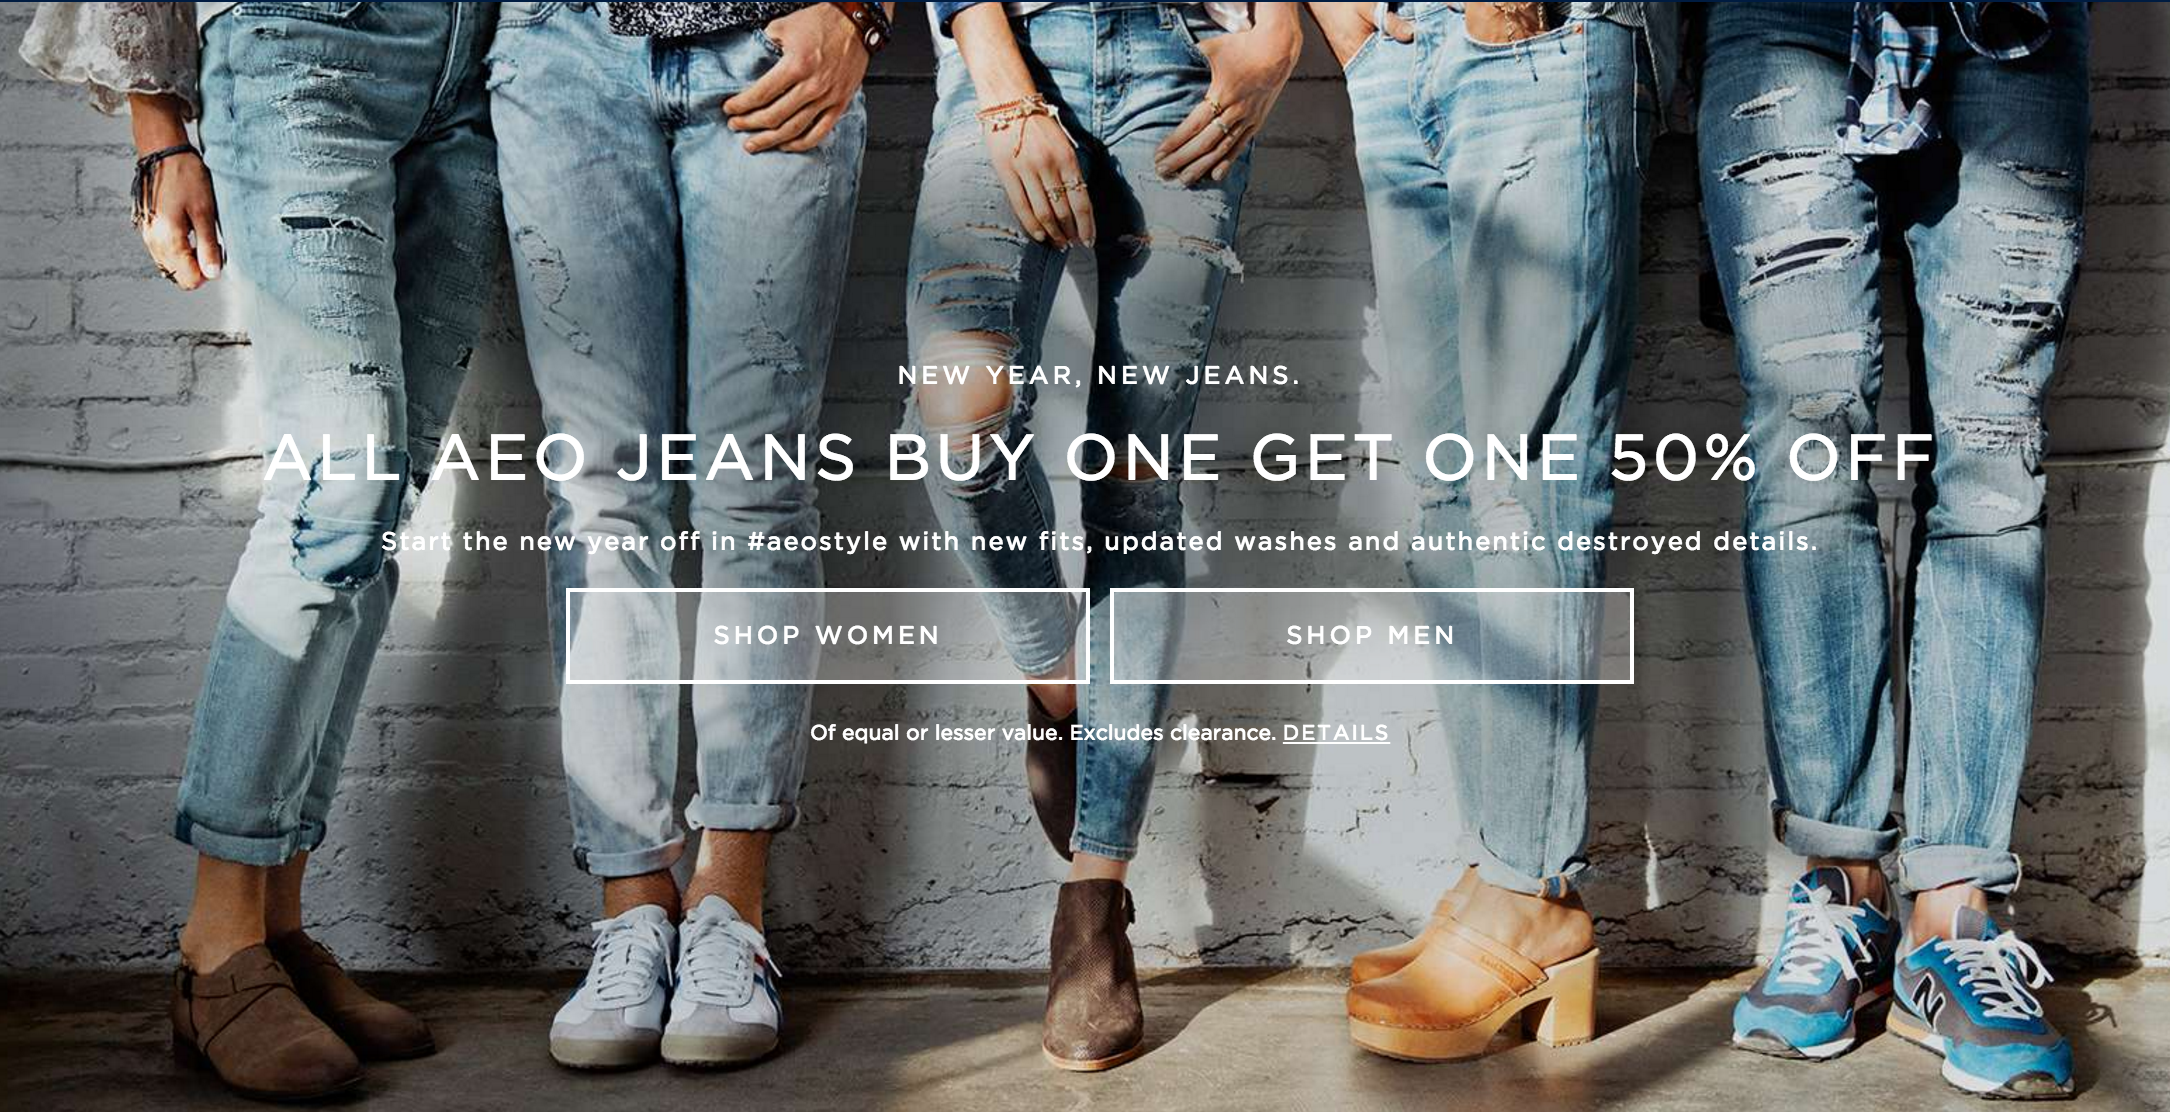 American Eagle Outfitters: BOGO 50% Off 